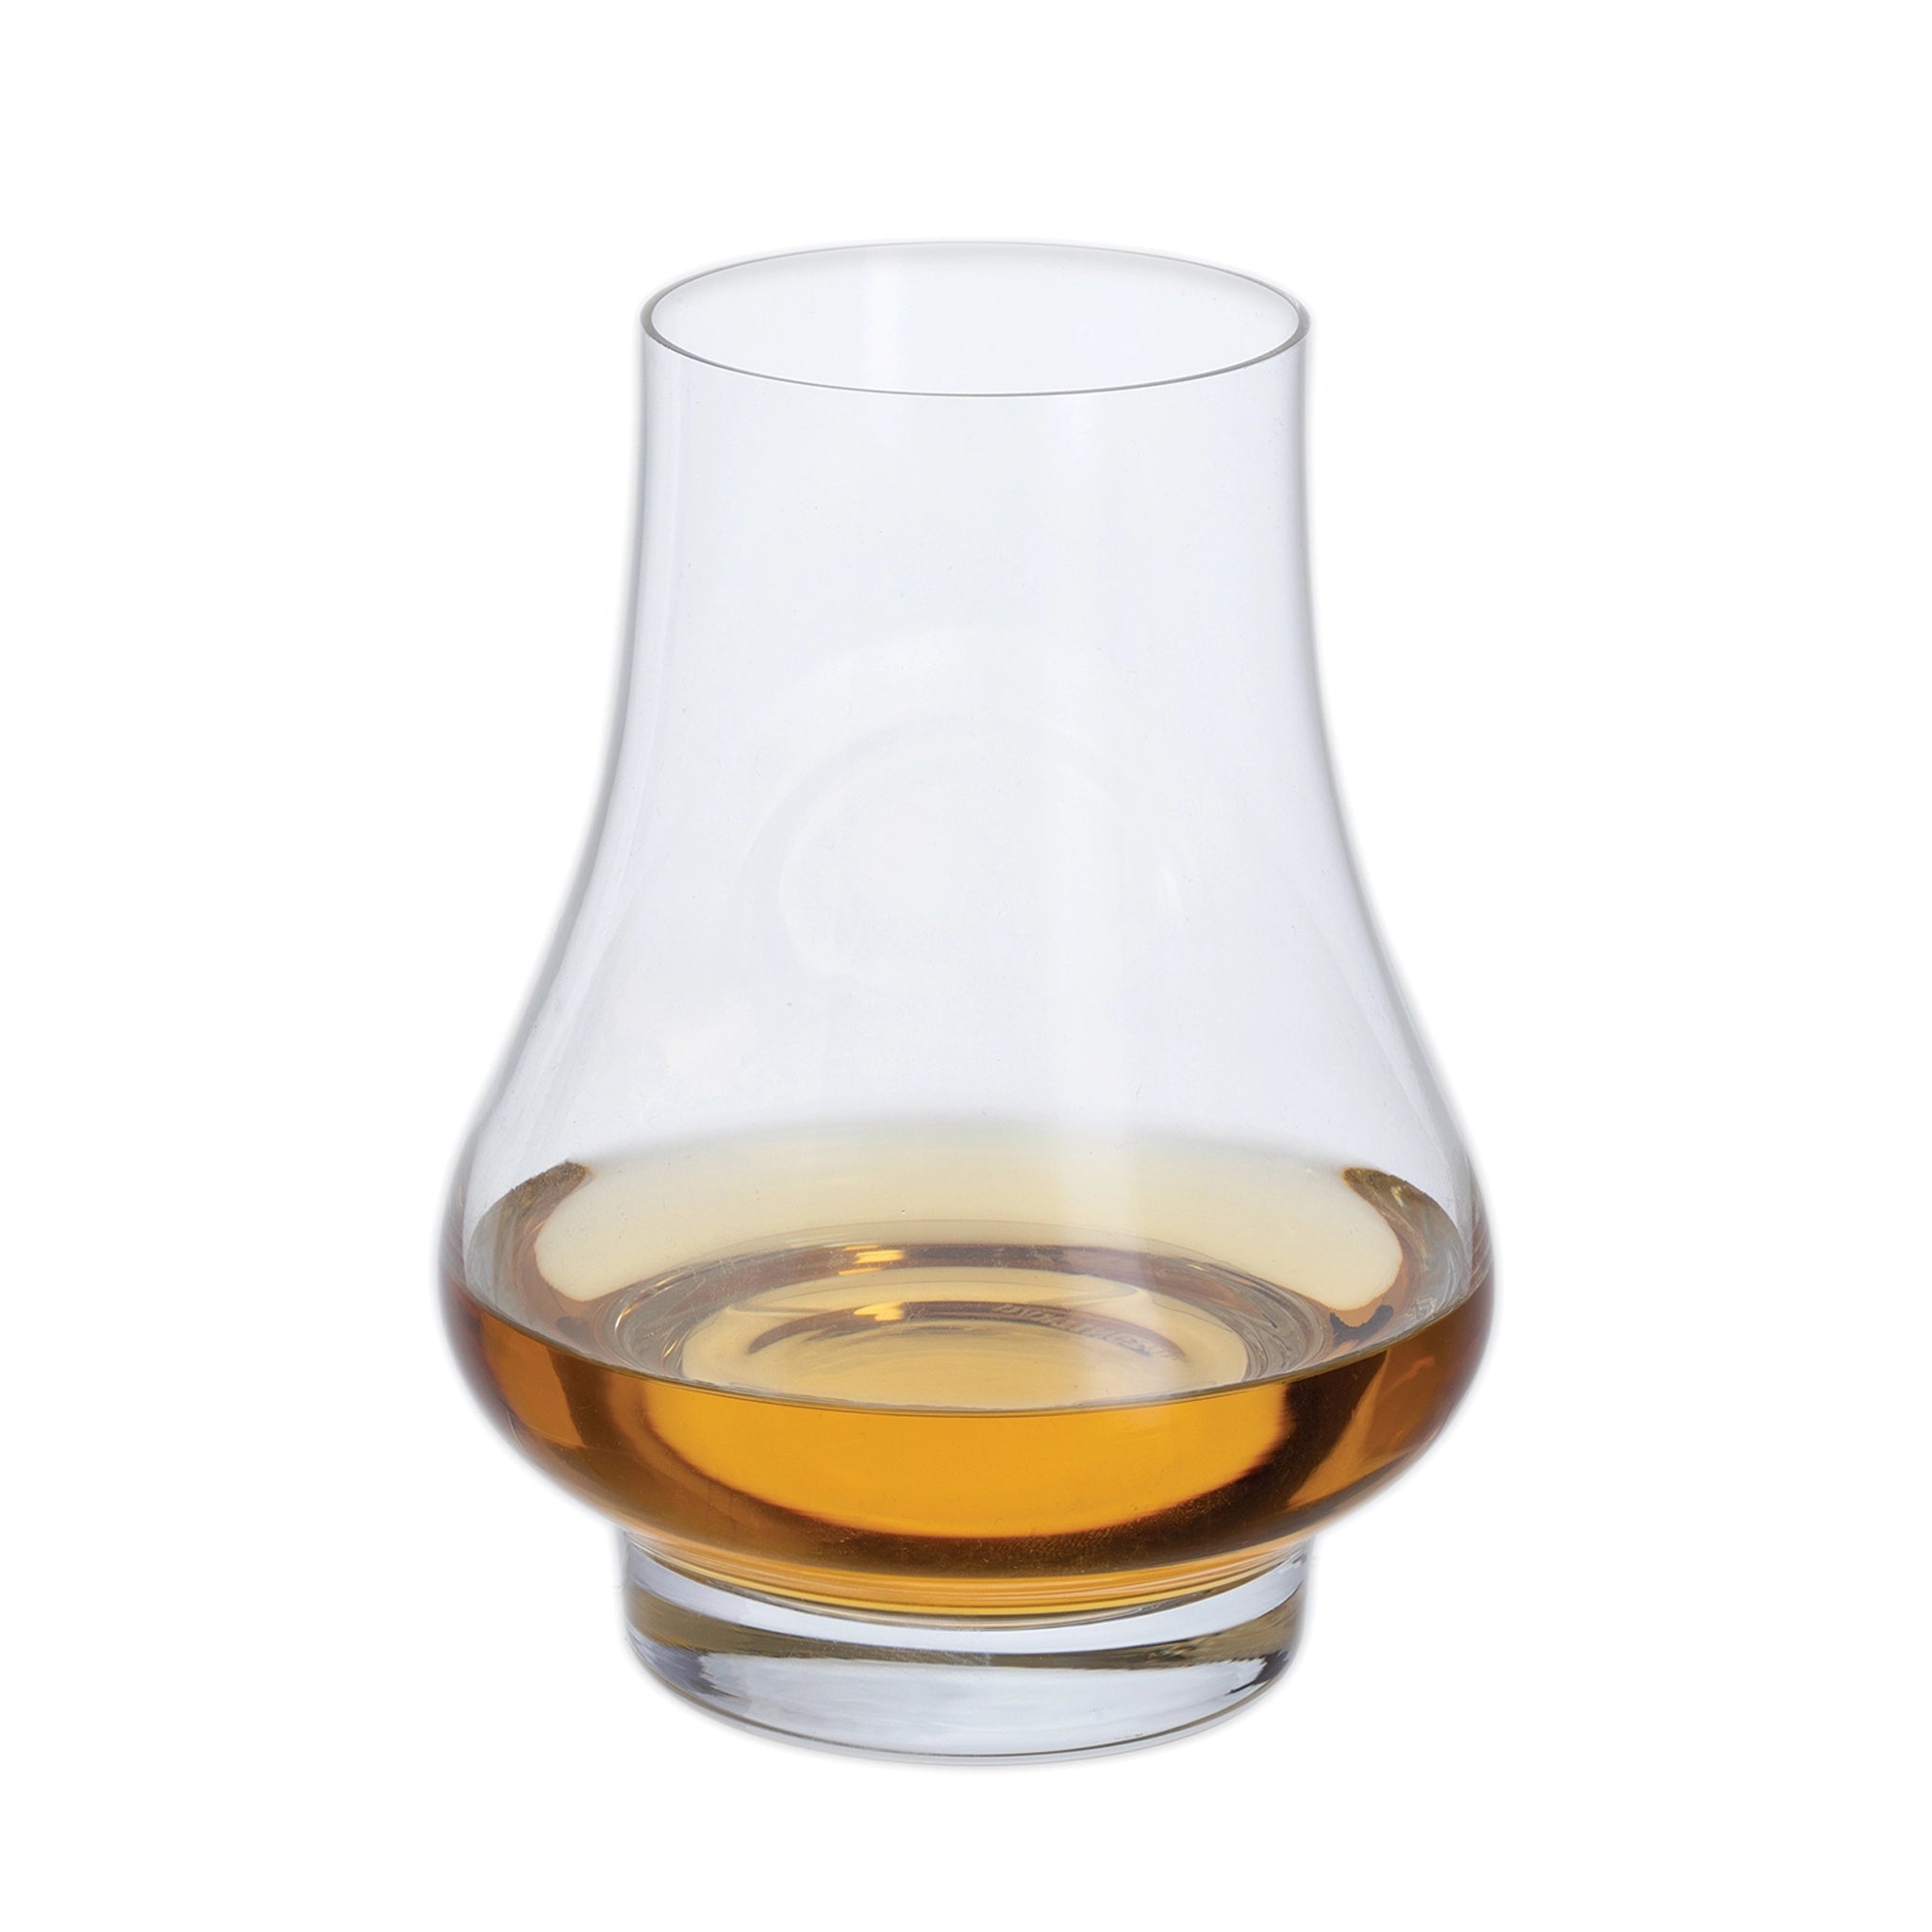 Whisky nosing glass with tapered top and wide base containing a shot of amber whisky